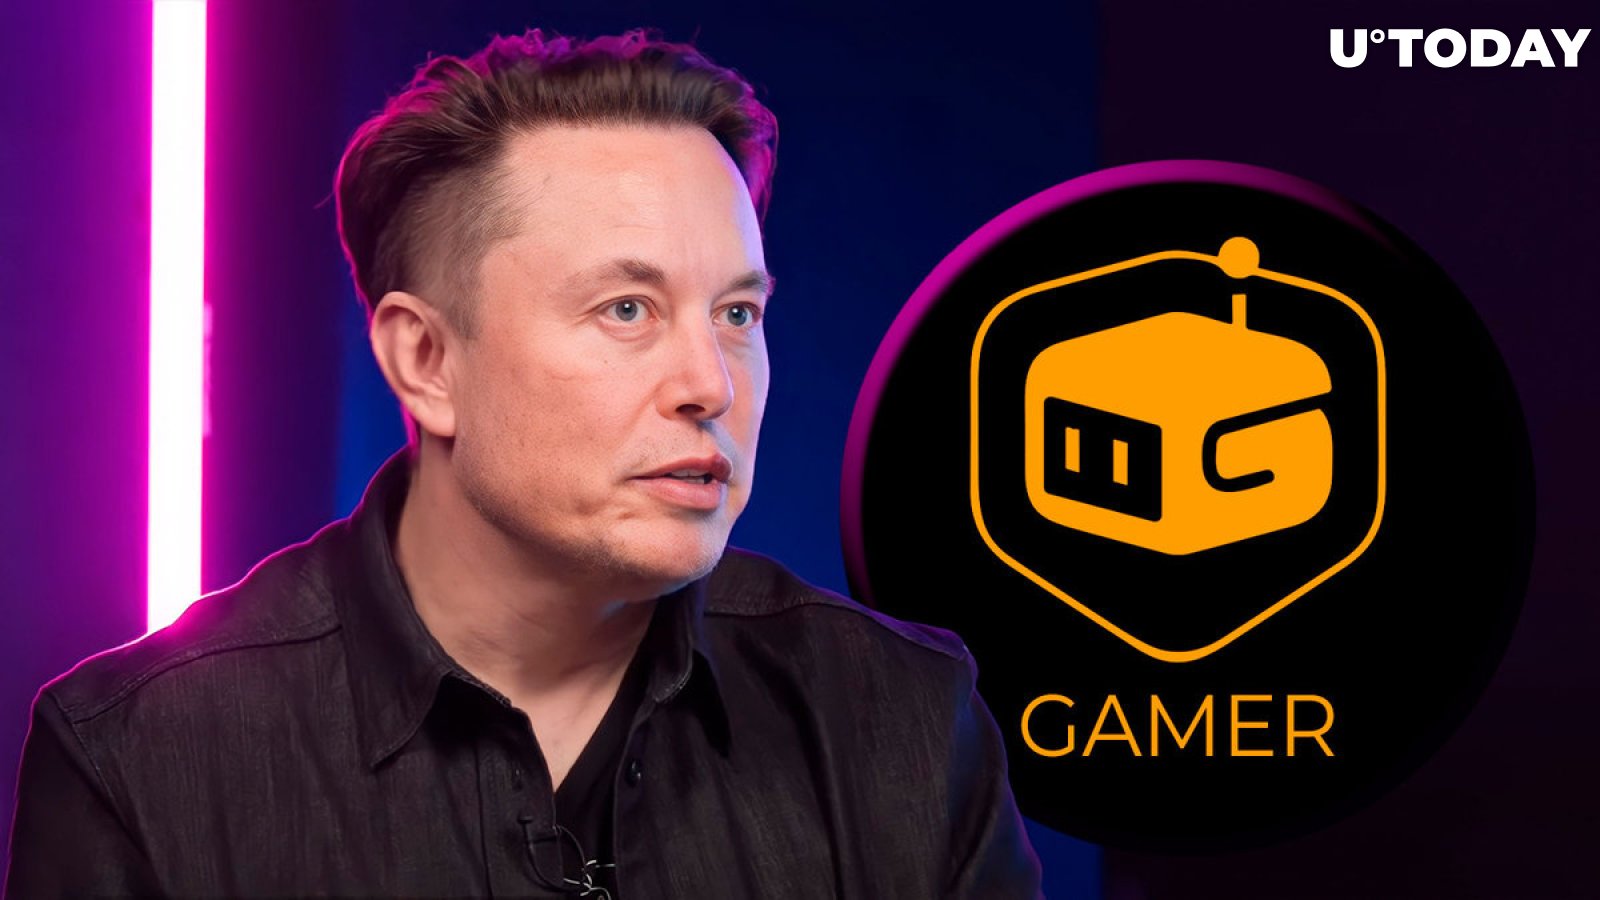 Elon Musk's Tweet Pushes This Gamer Coin Price Up 